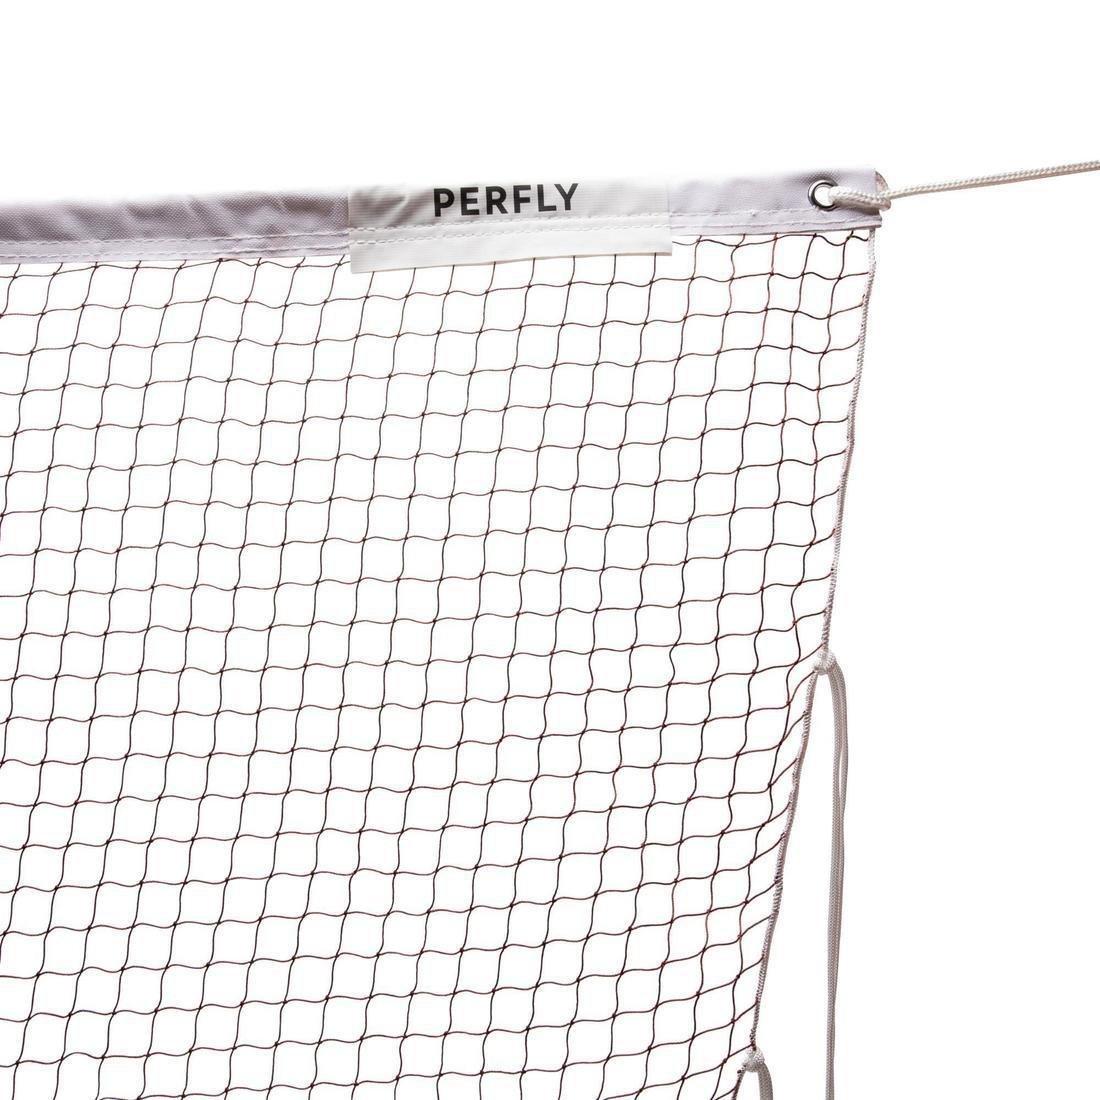 PERFLY - Badminton Competition Net, Black